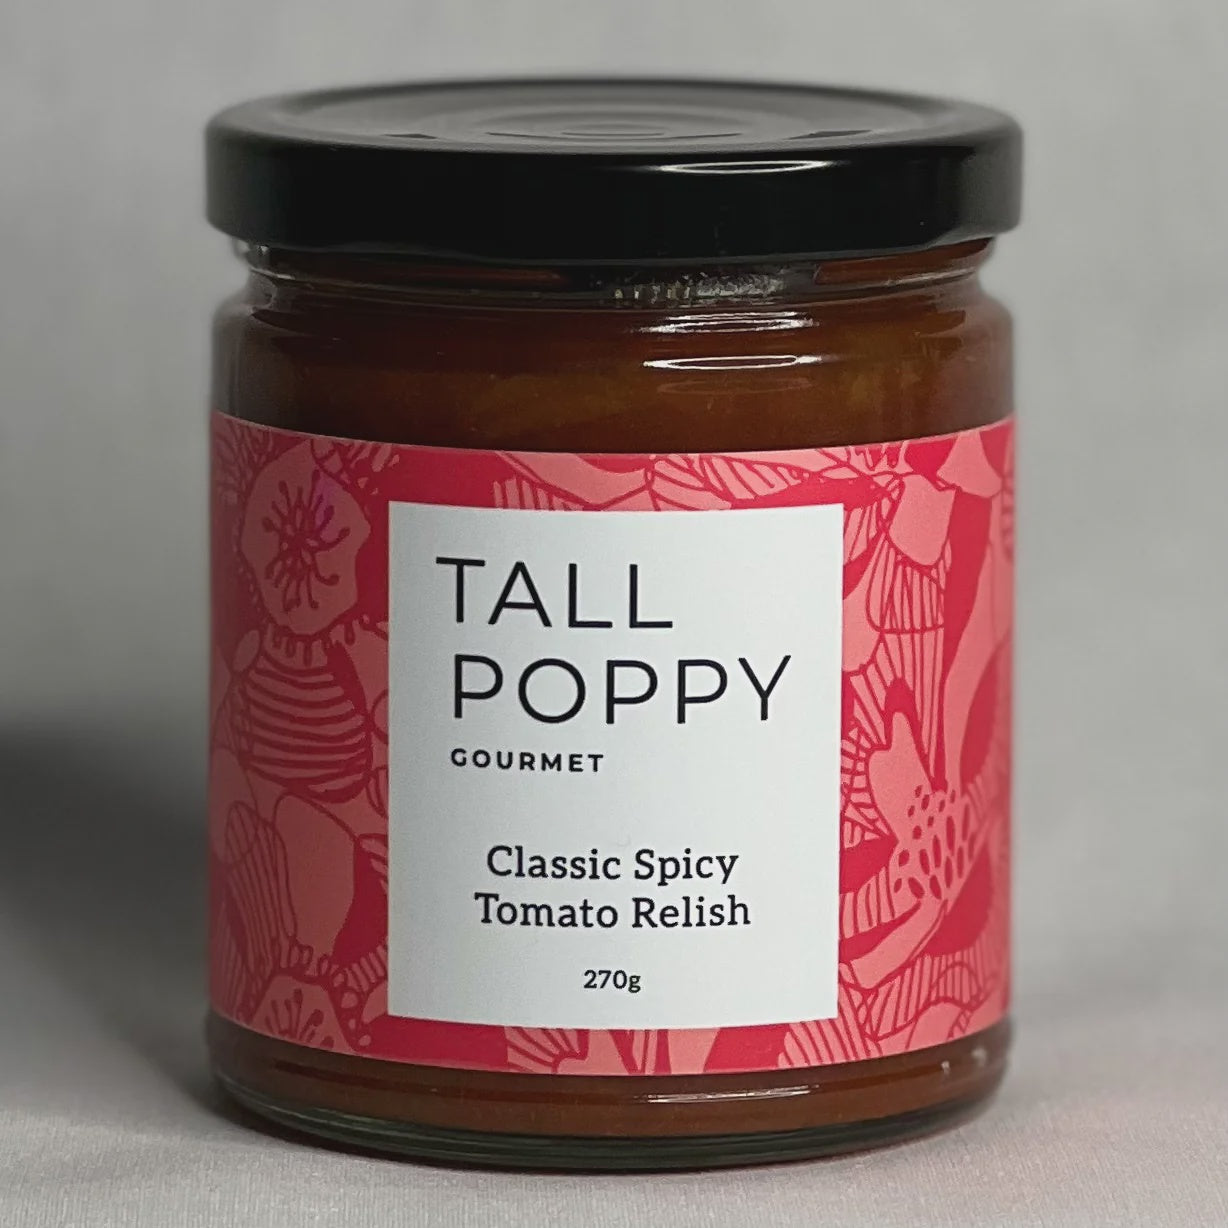 Tall Poppy Classic Spicy Tomato Relish 270g